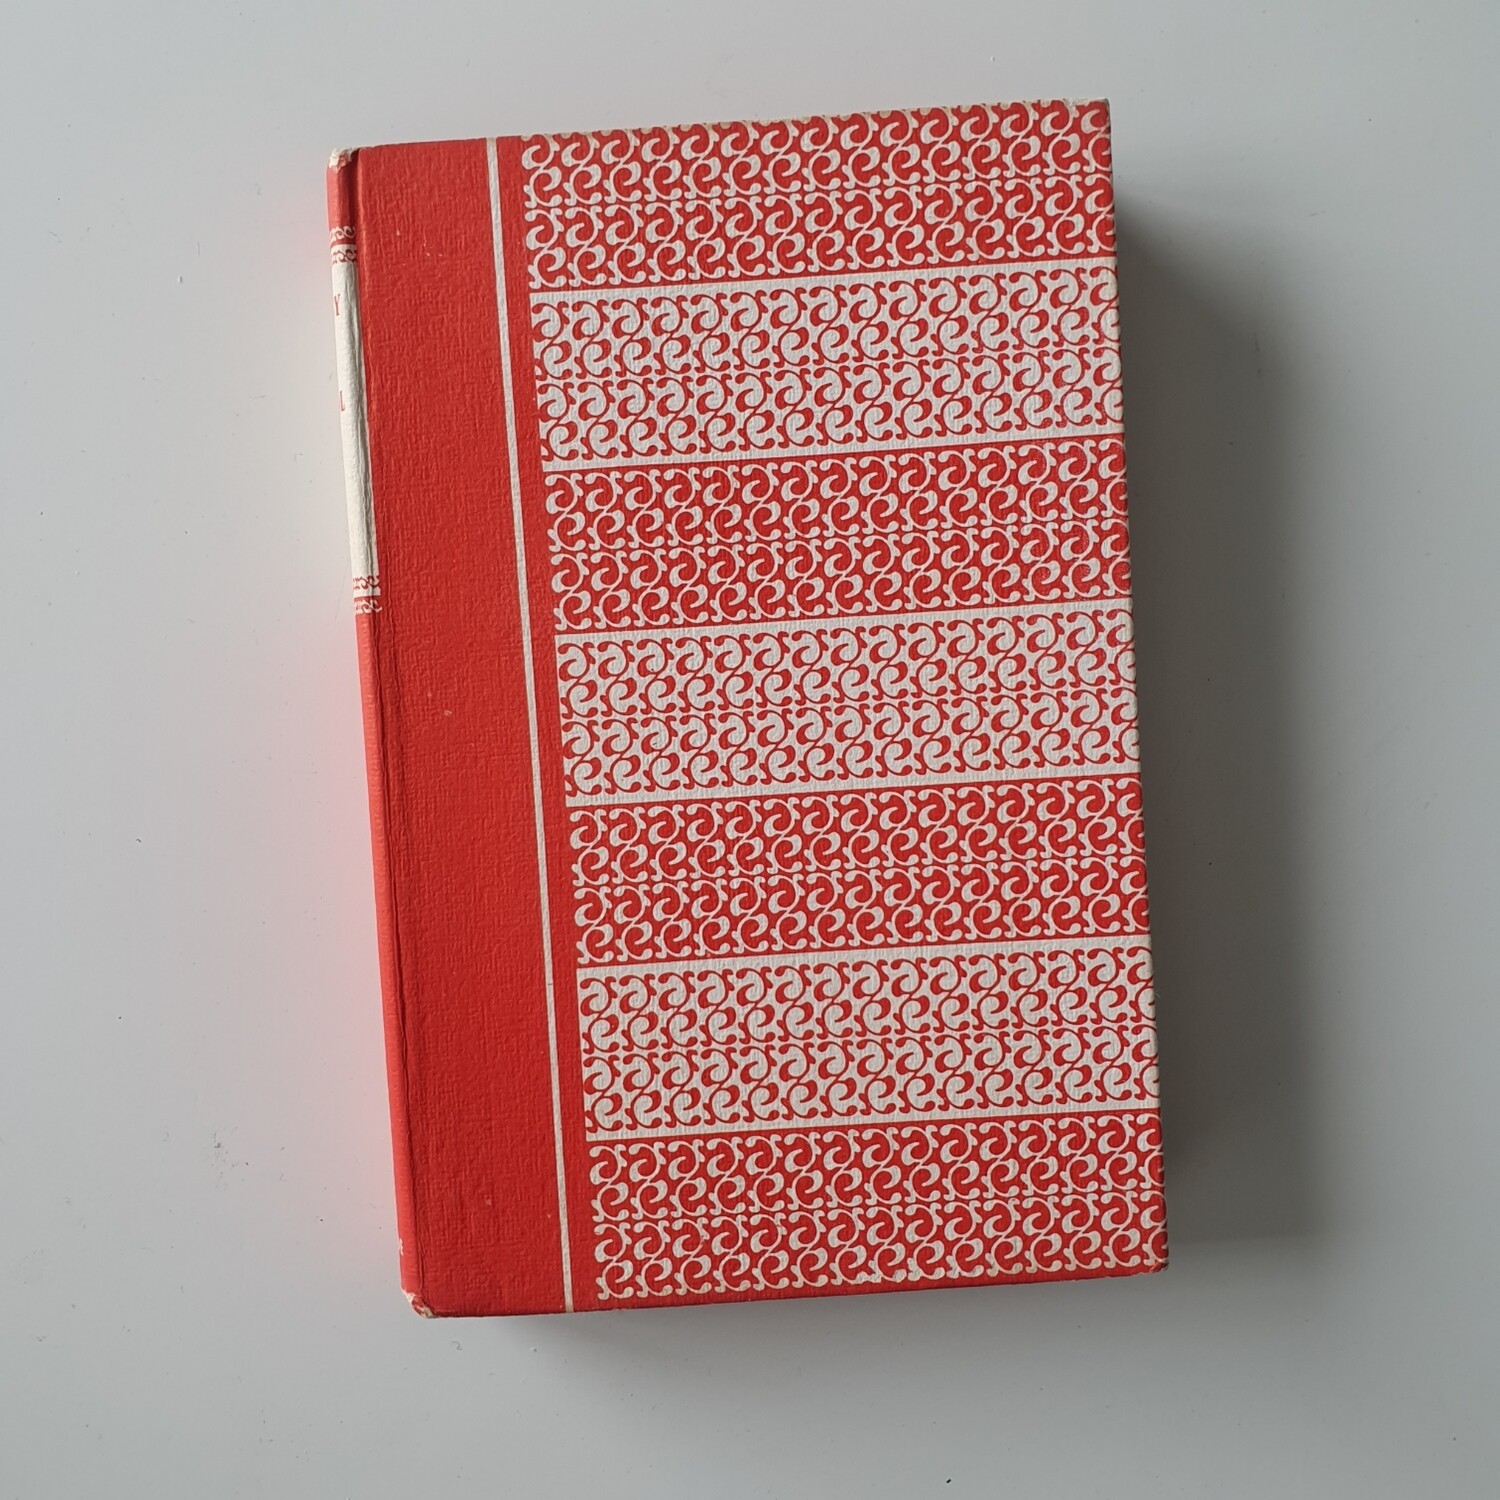 What Katy Did at School, red and white, circa 1950s